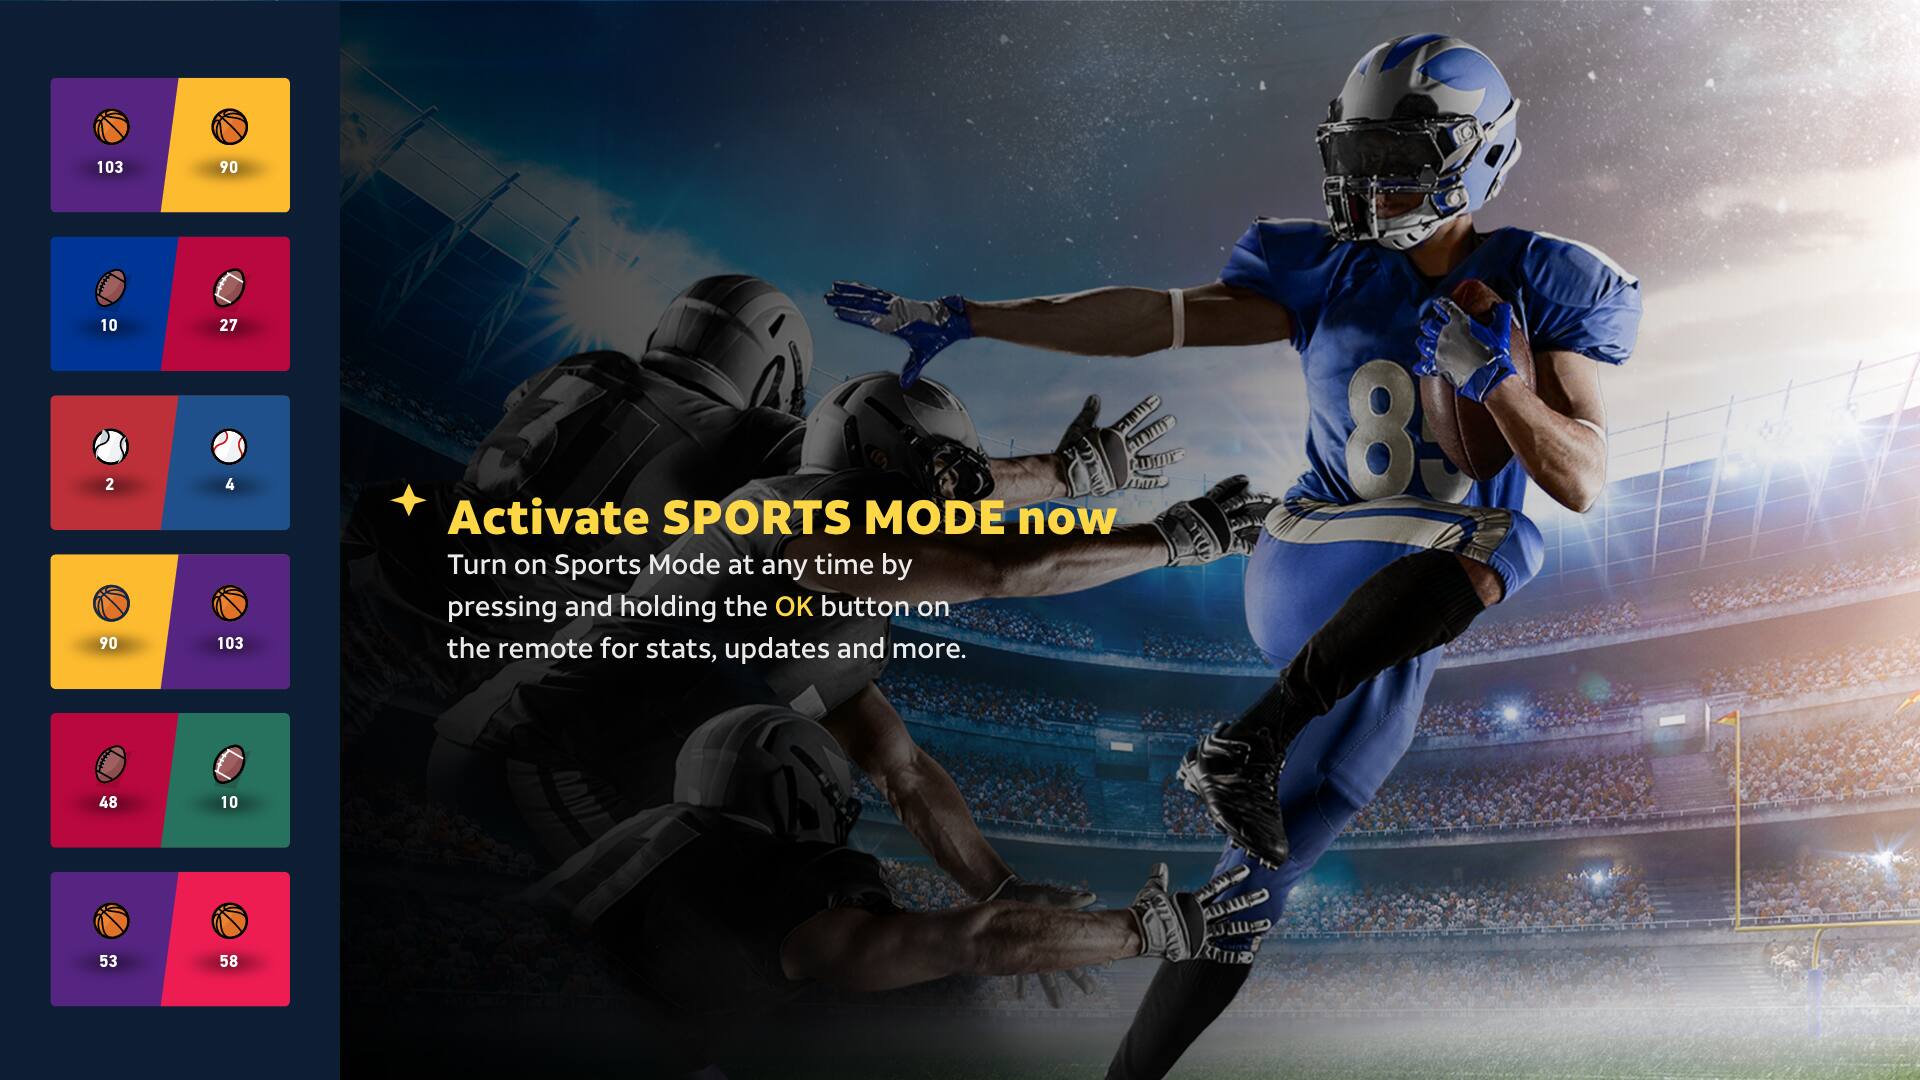 Experience NFL On DIRECTV With Sports Central